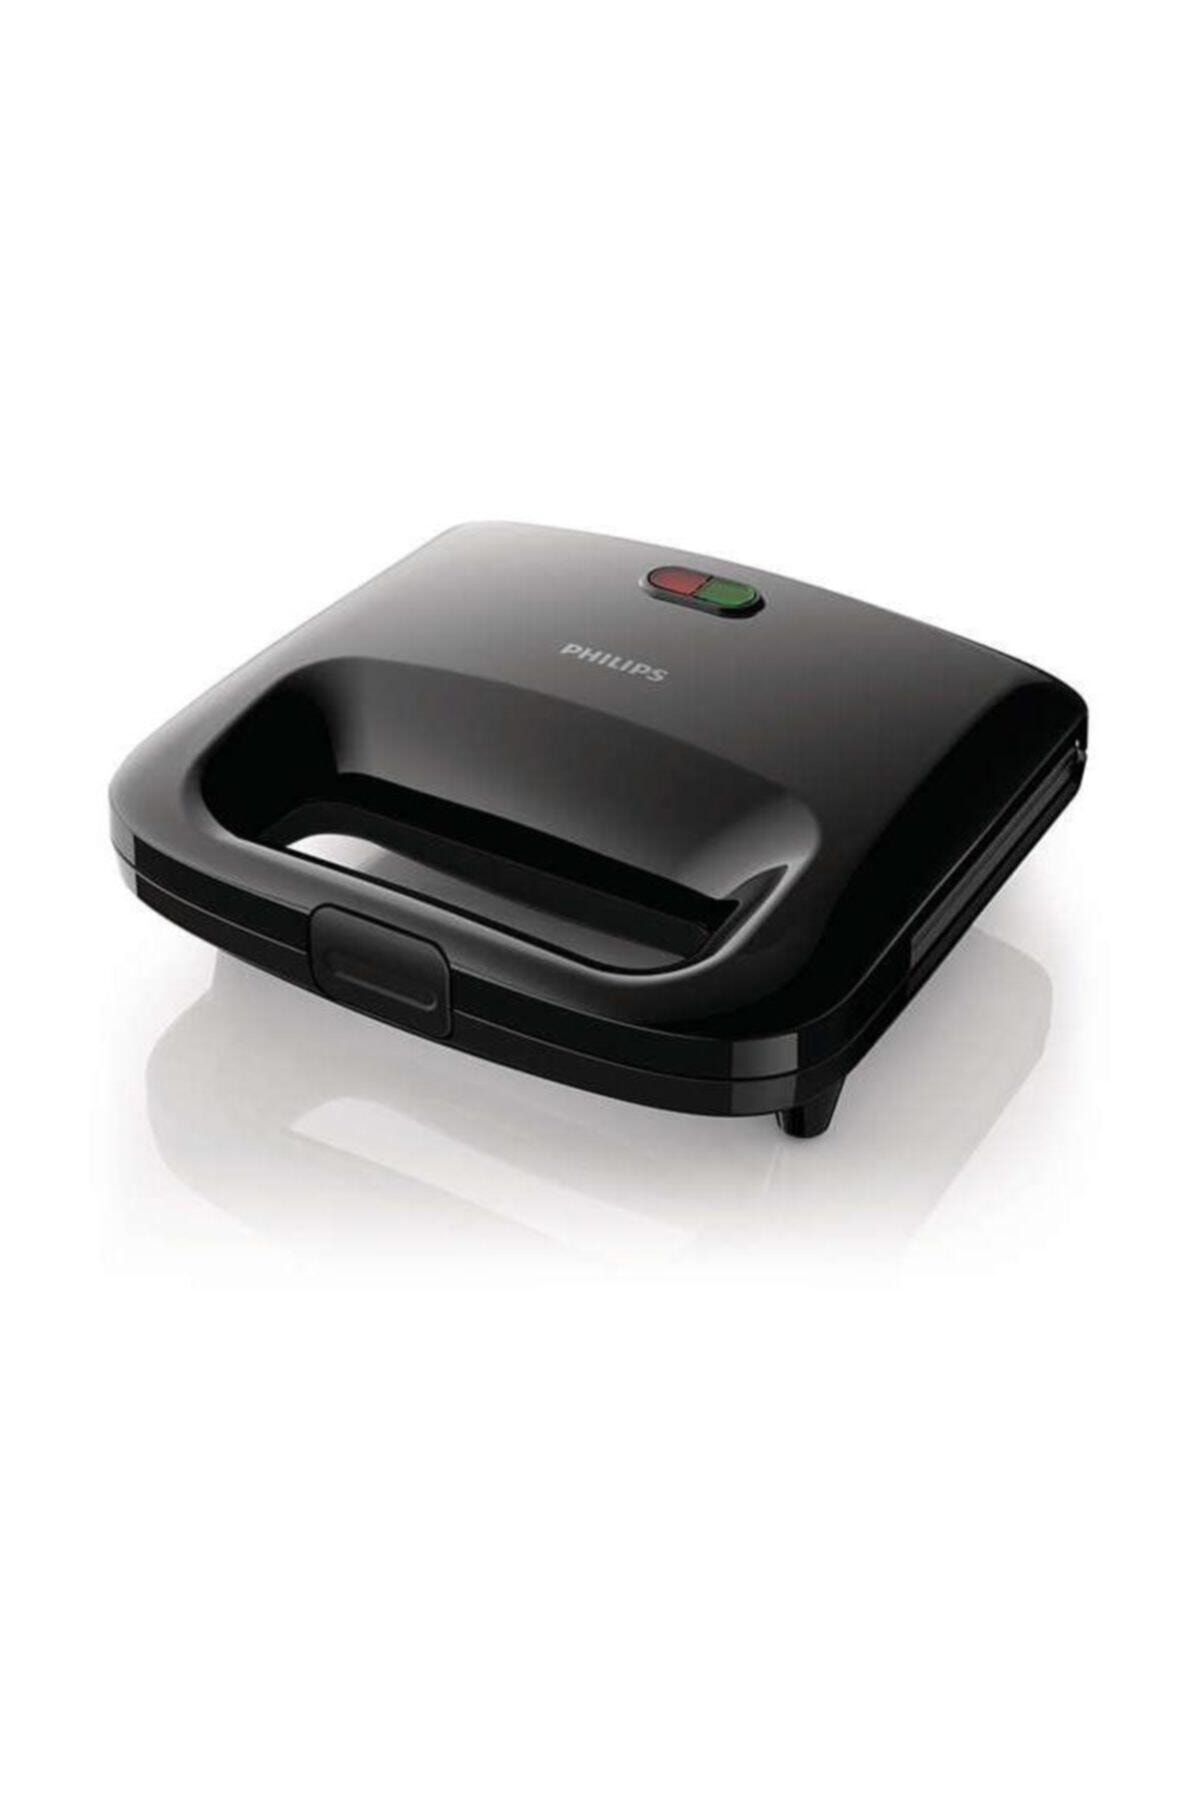 Philips Makinesidaily Collection Hd2395/90 Tost